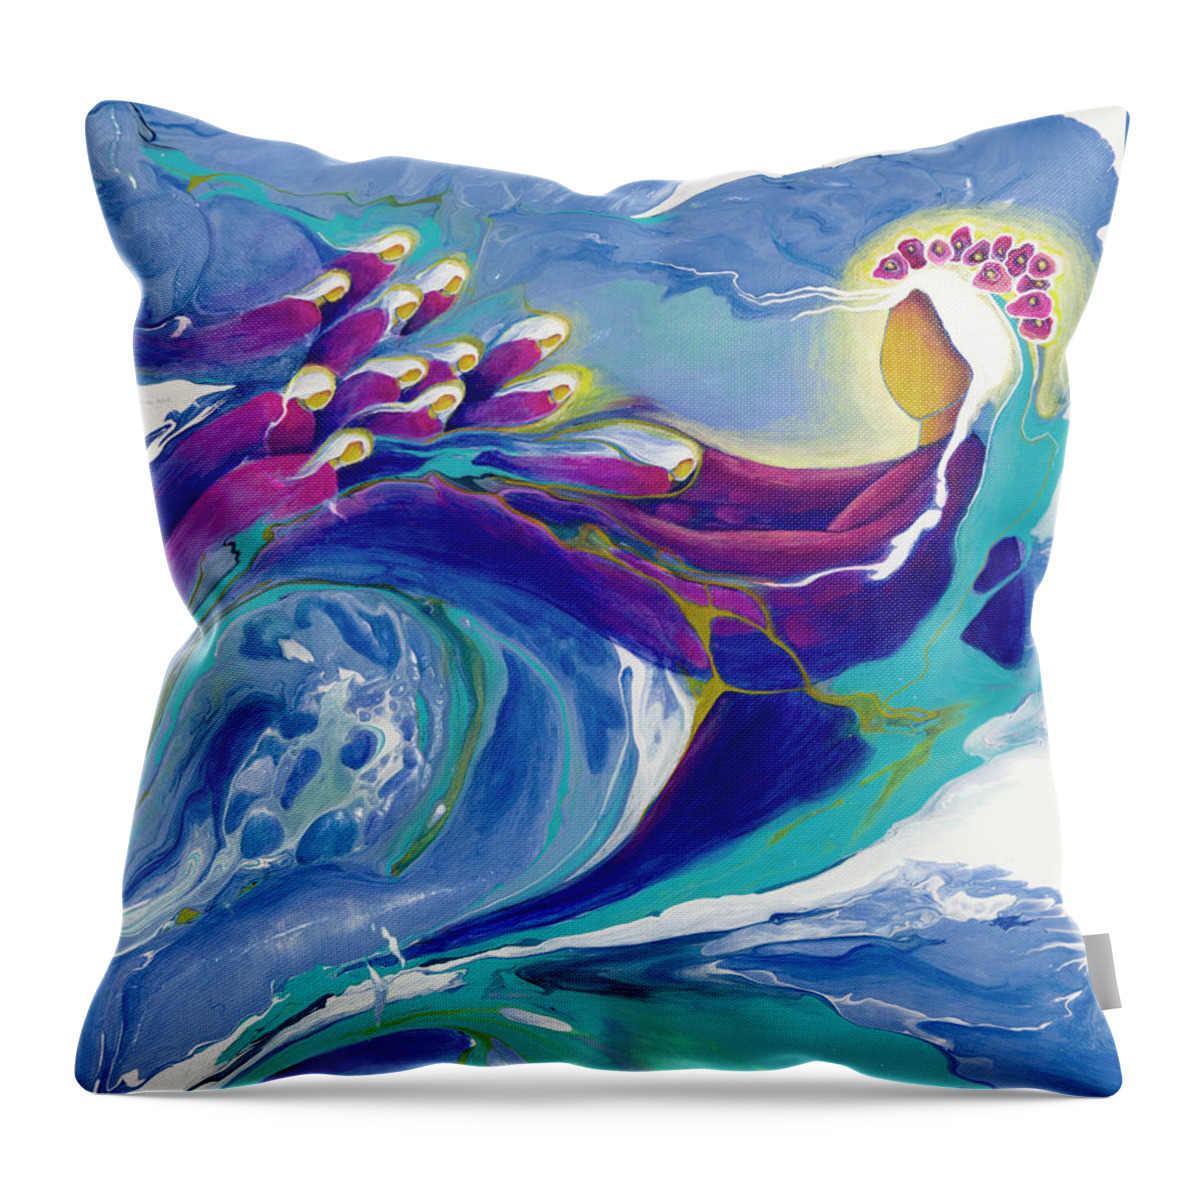 Divine Mother Throw Pillow featuring the painting Homecoming by Darcy Lee Saxton